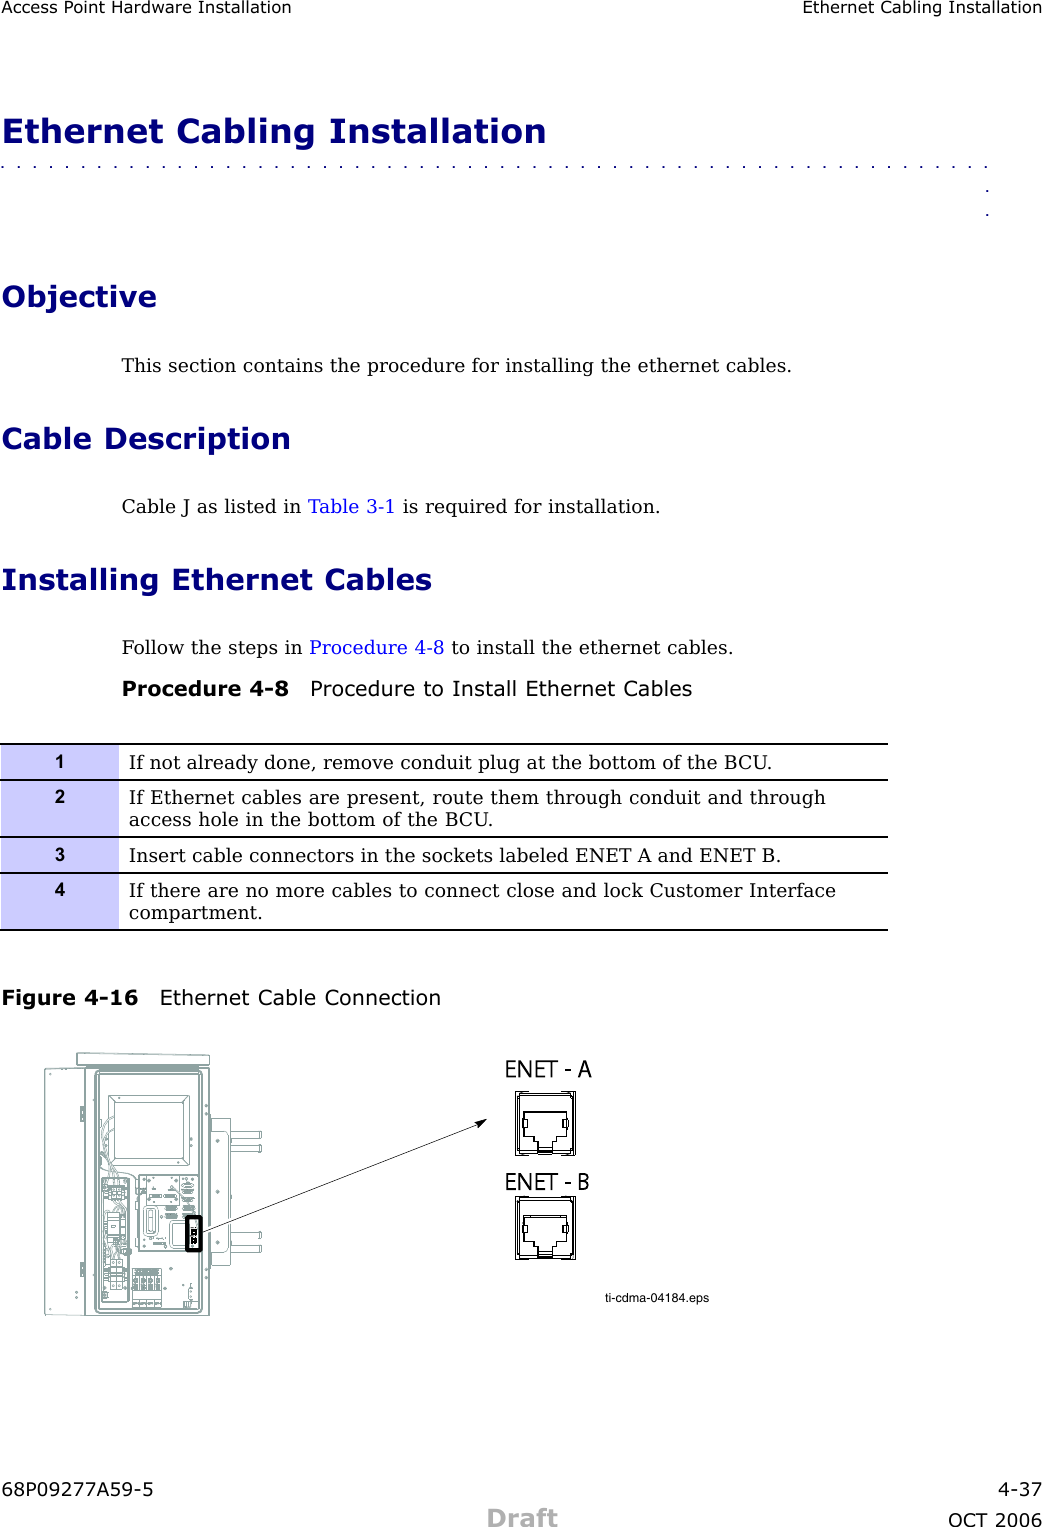 Access P oint Hardw are Installation Ethernet Cabling InstallationEthernet Cabling Installation■■■■■■■■■■■■■■■■■■■■■■■■■■■■■■■■■■■■■■■■■■■■■■■■■■■■■■■■■■■■■■■■ObjectiveThis section contains the procedure for installing the ethernet cables.Cable DescriptionCable J as listed in T able 3 -1 is required for installation.Installing Ethernet CablesF ollow the steps in Procedure 4 -8 to install the ethernet cables.Procedure 4 -8 Procedure to Install Ethernet Cables1If not already done, remove conduit plug at the bottom of the B CU .2If Ethernet cables are present, route them through conduit and throughaccess hole in the bottom of the B CU .3Insert cable connectors in the sockets labeled ENET A and ENET B.4If there are no more cables to connect close and lock Customer Interfacecompartment.Figure 4 -16 Ethernet Cable Connectionti-cdma-04184.epsENET - AENET - AENET - BENET - B68P09277A59 -5 4 -37Draft OCT 2006